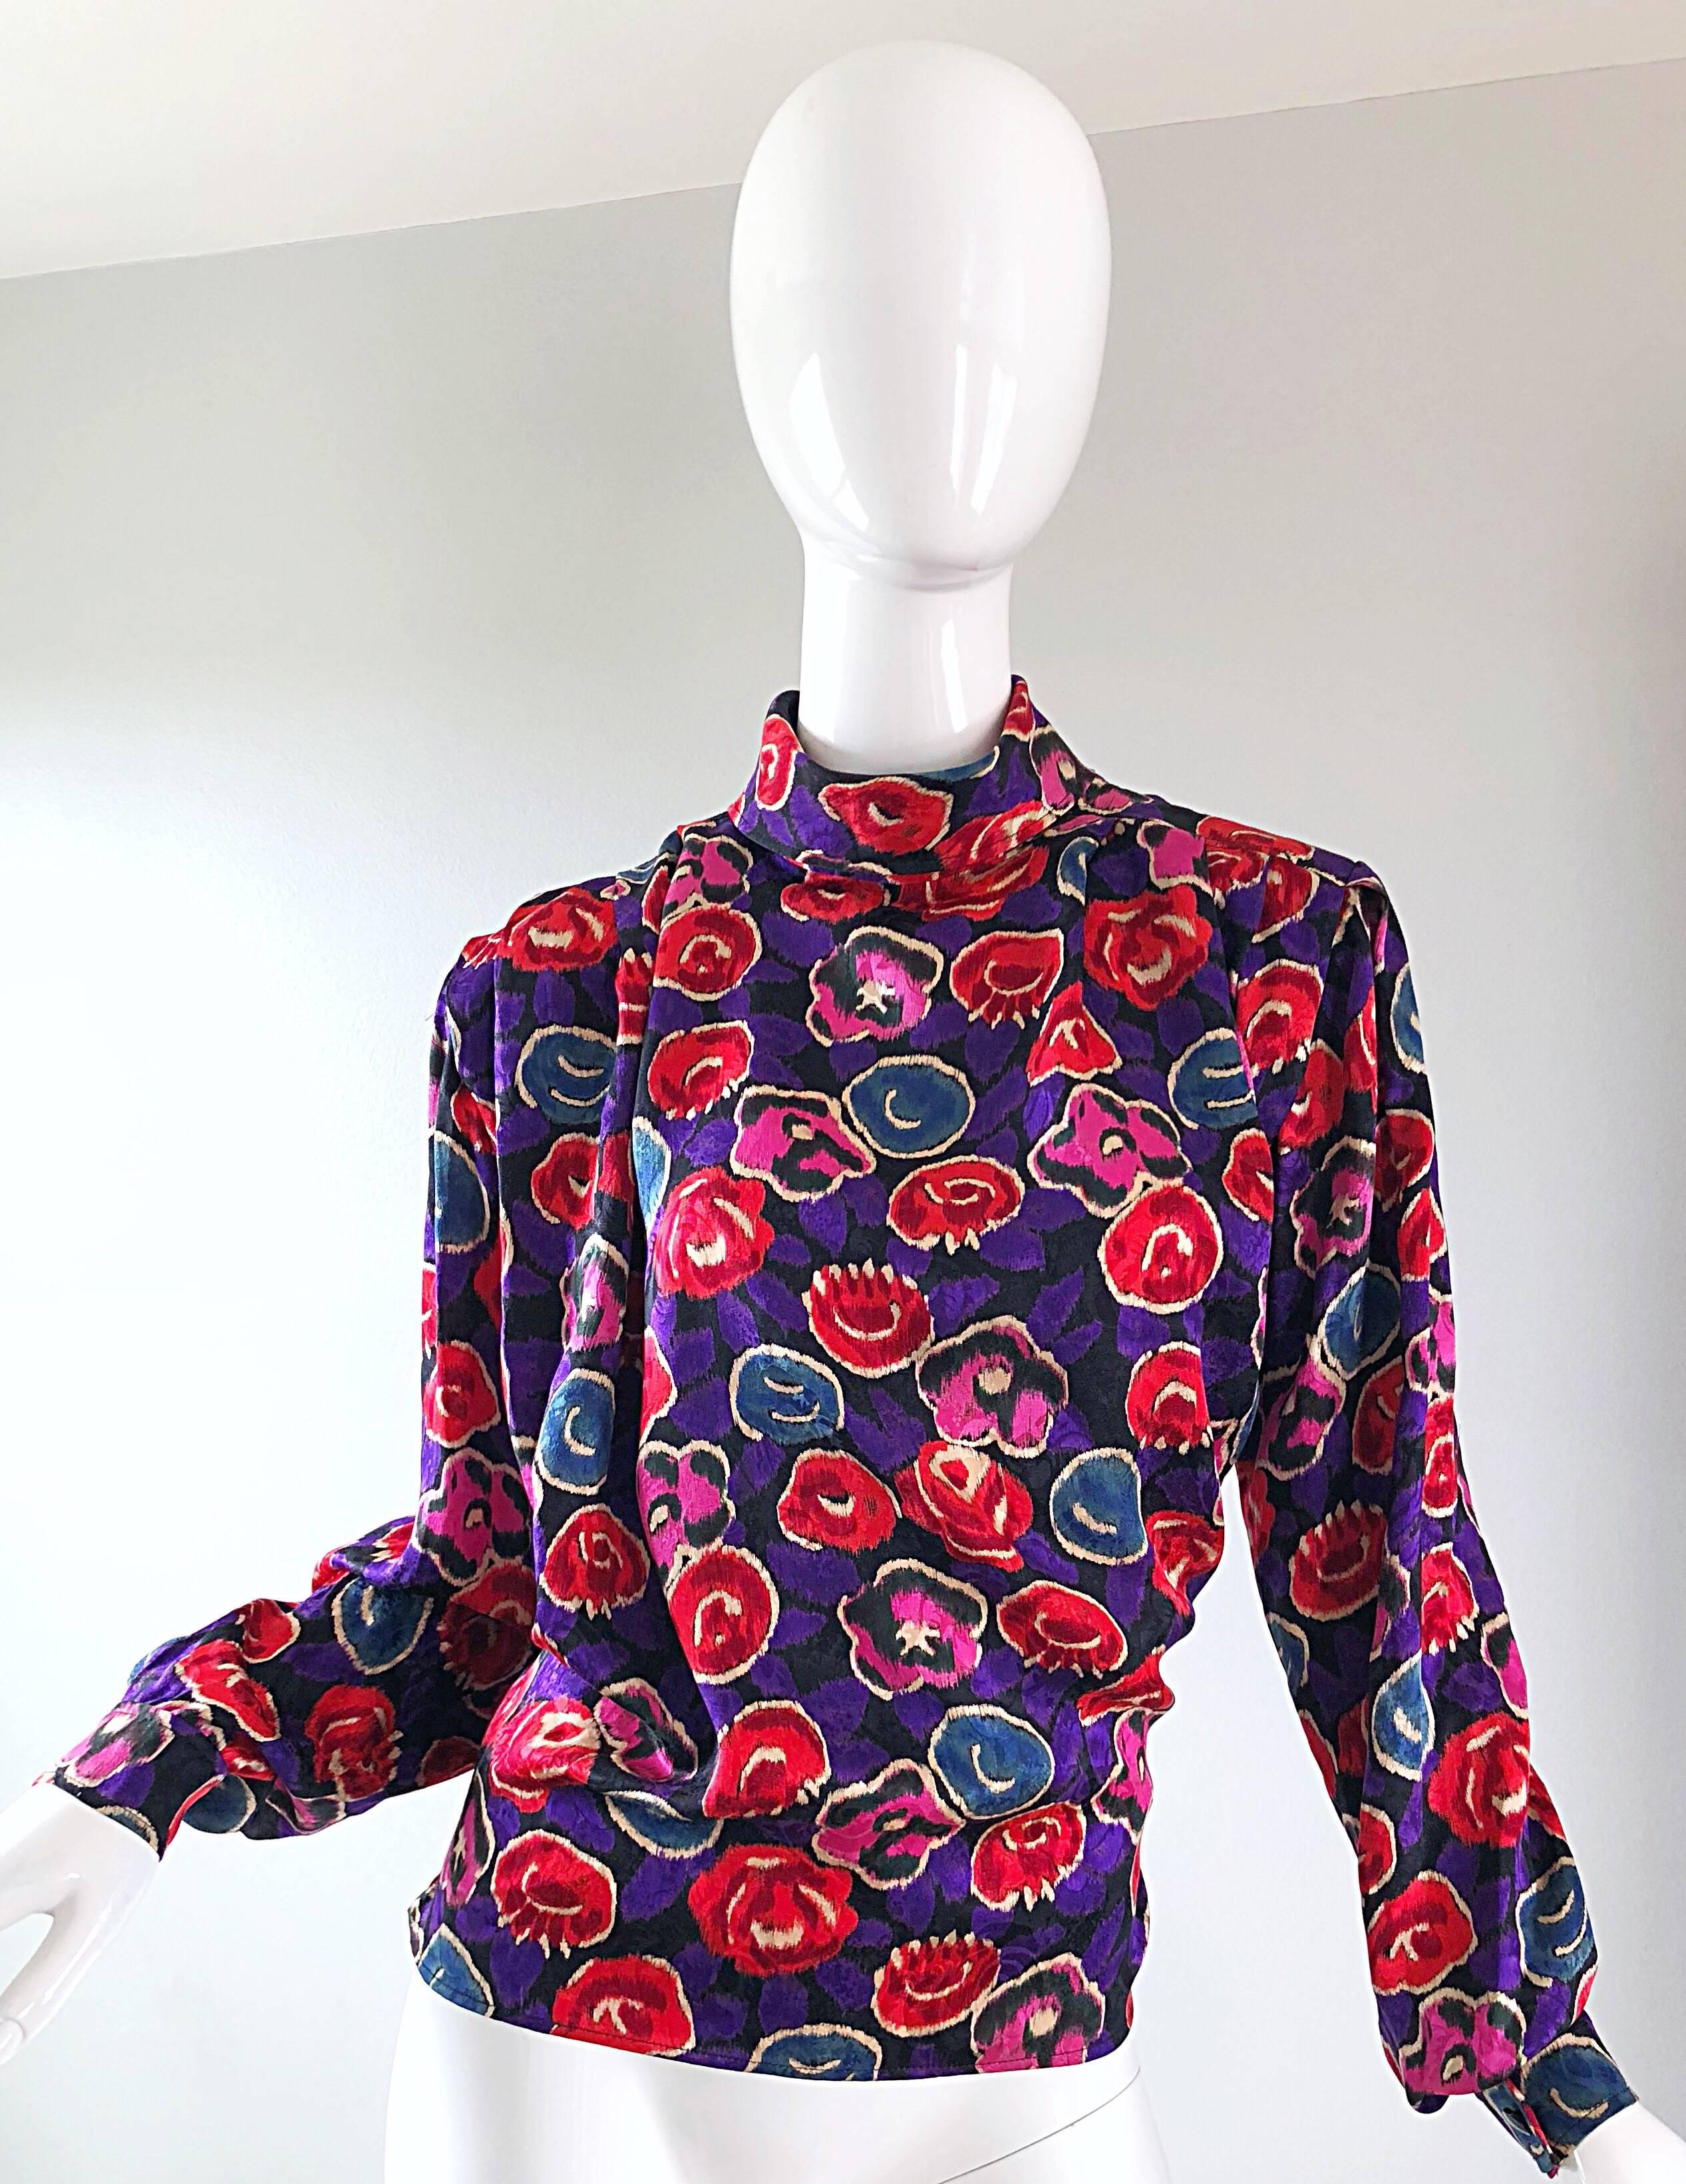 Beautiful vintage early 90s EMANUEL UNGARO for BERGDORF GOOFMAN high neck flower print long sleeve blouse! This top has it all! Chic blousy fit, high neck, and dolman sleeves! Flowers in vibrant colors of pink, red and blue with a rich regal purple